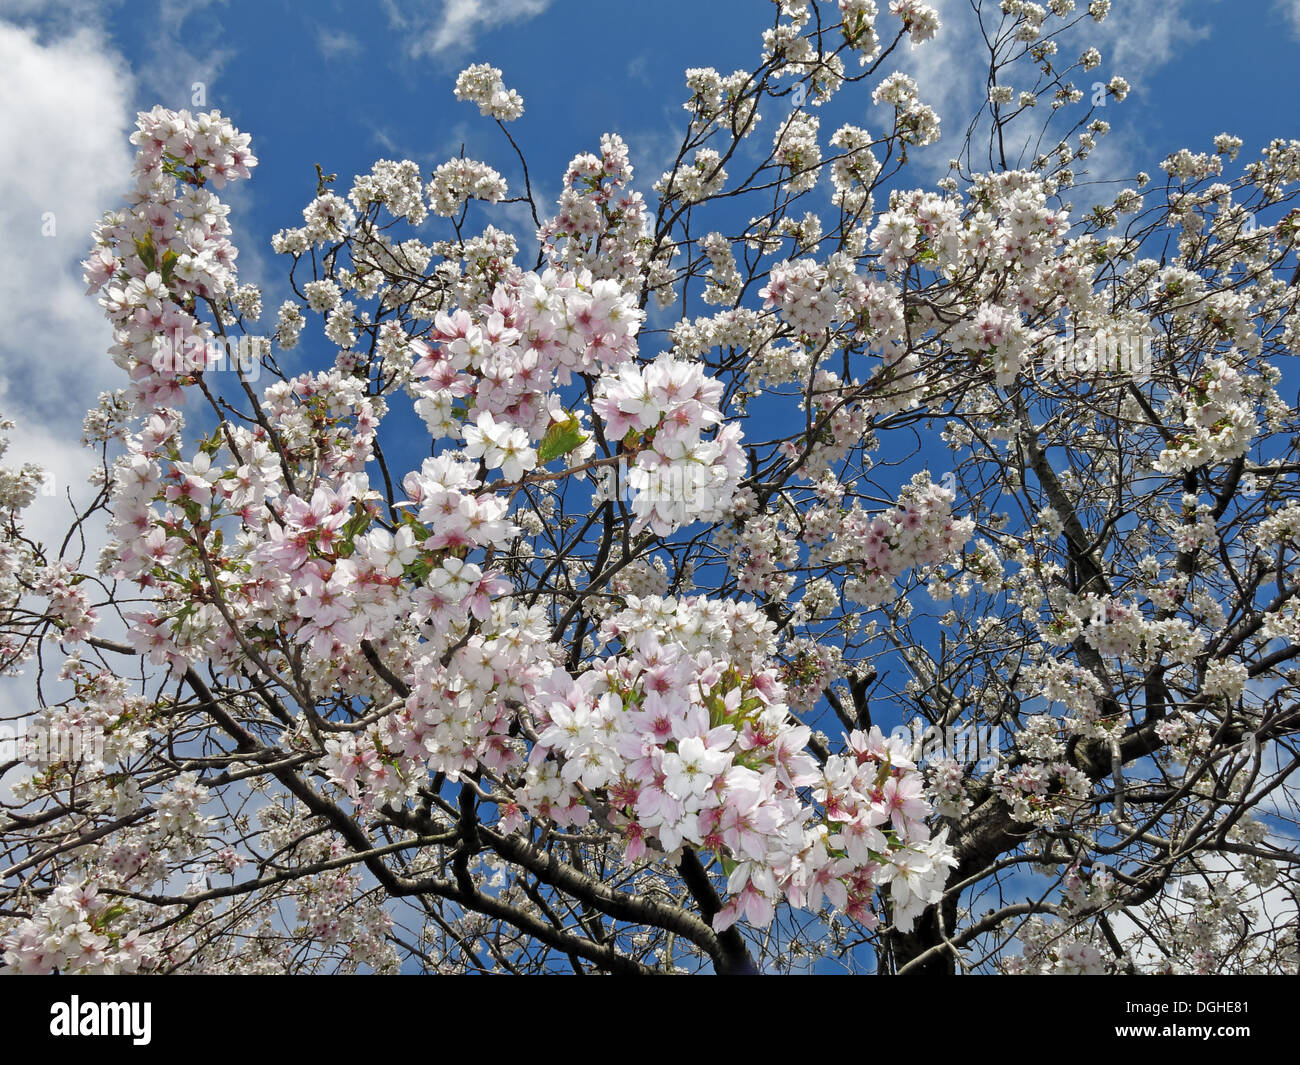 Signs of spring New creme white apple / cherry Blossom flowers against a deep blue sky England Stock Photo